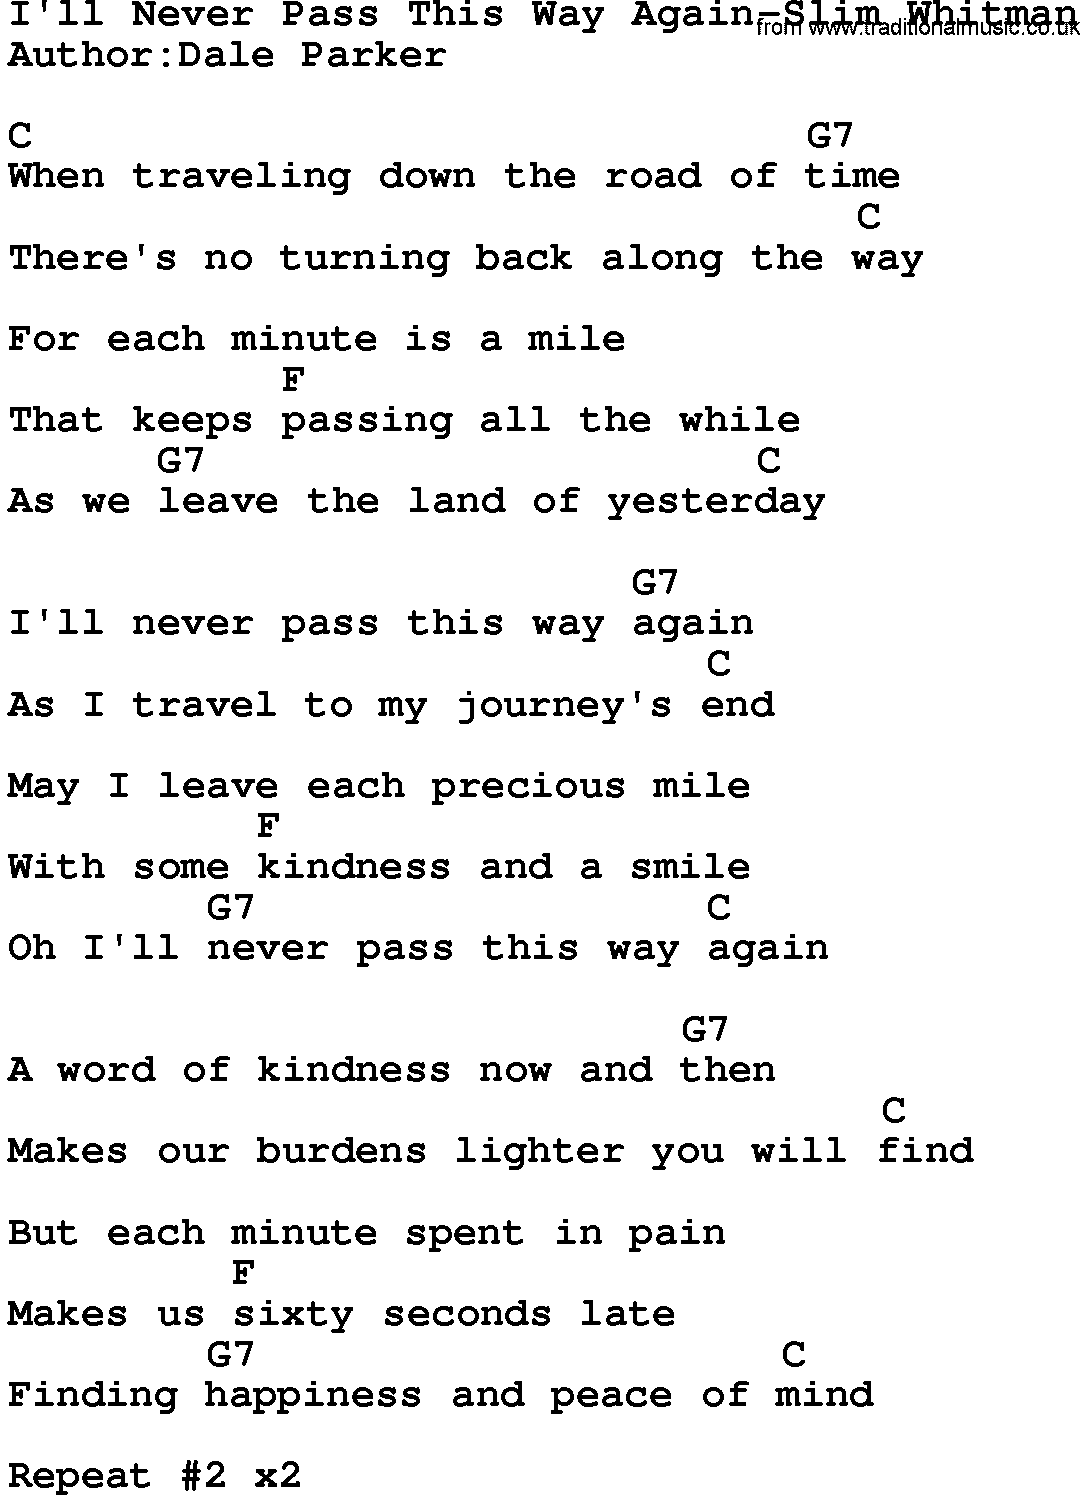 Country music song: I'll Never Pass This Way Again-Slim Whitman lyrics and chords